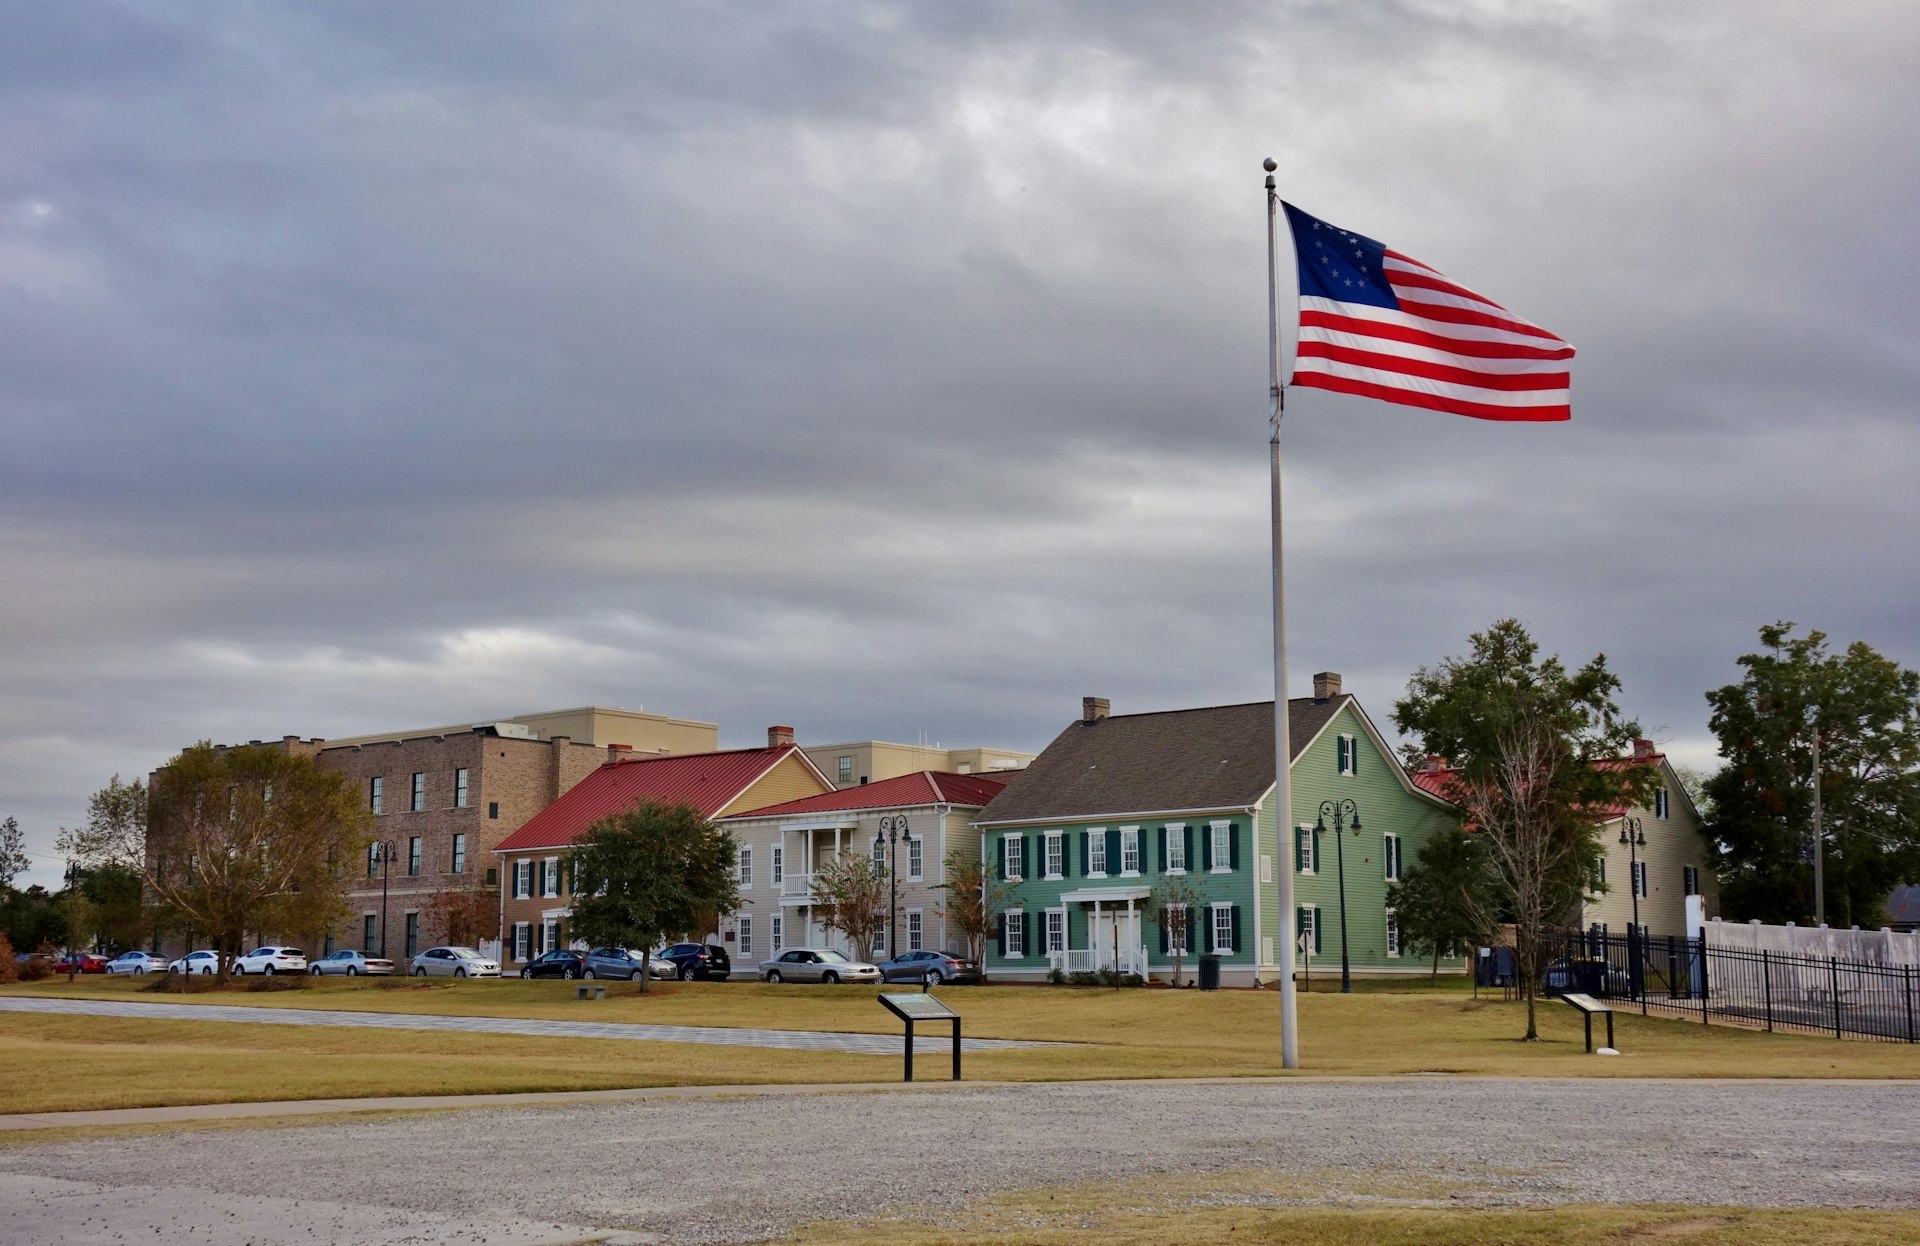 An American flag flies above a large open space lined with grand buildings